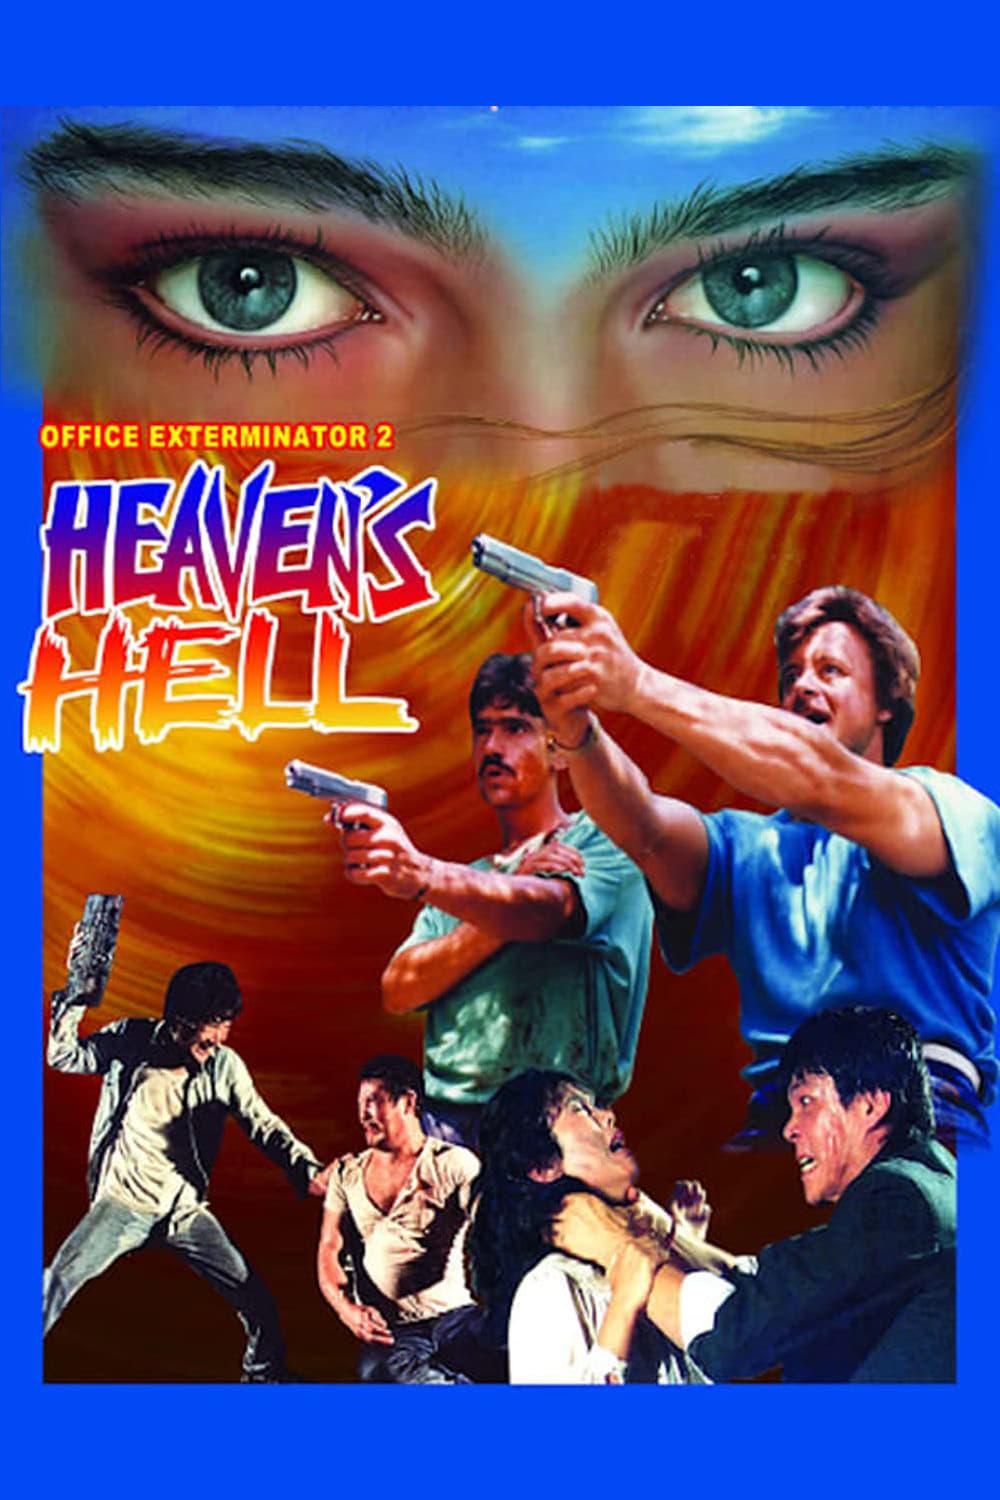 Official Exterminator 2: Heaven's Hell poster